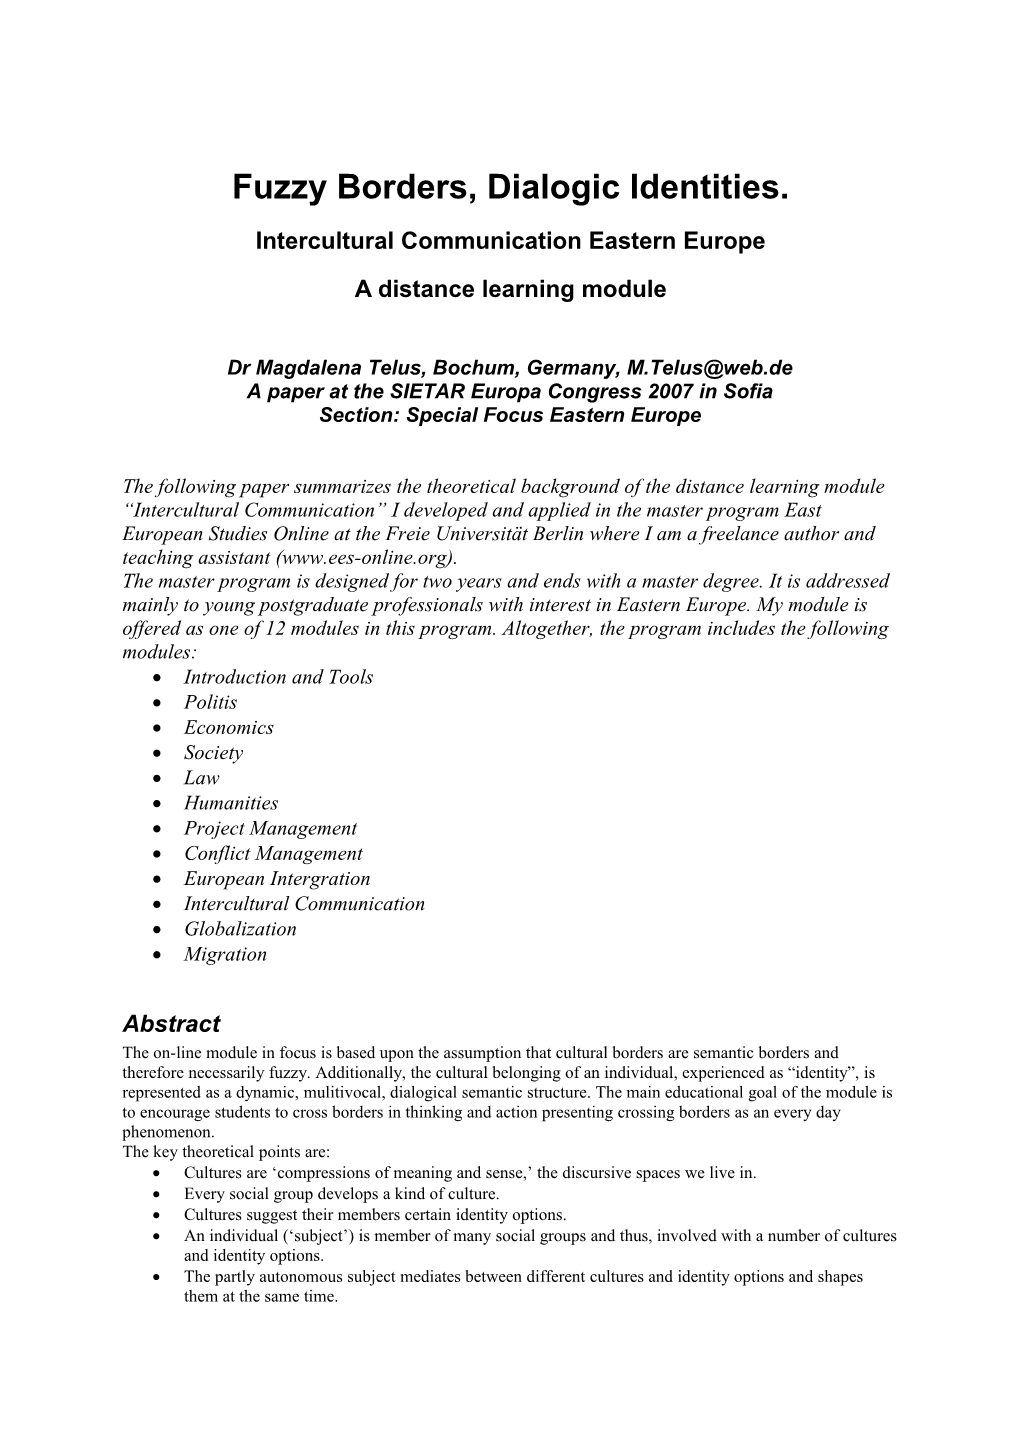 The Distance Learning Module Intercultural Communication Eastern Europe Beyond the Culture